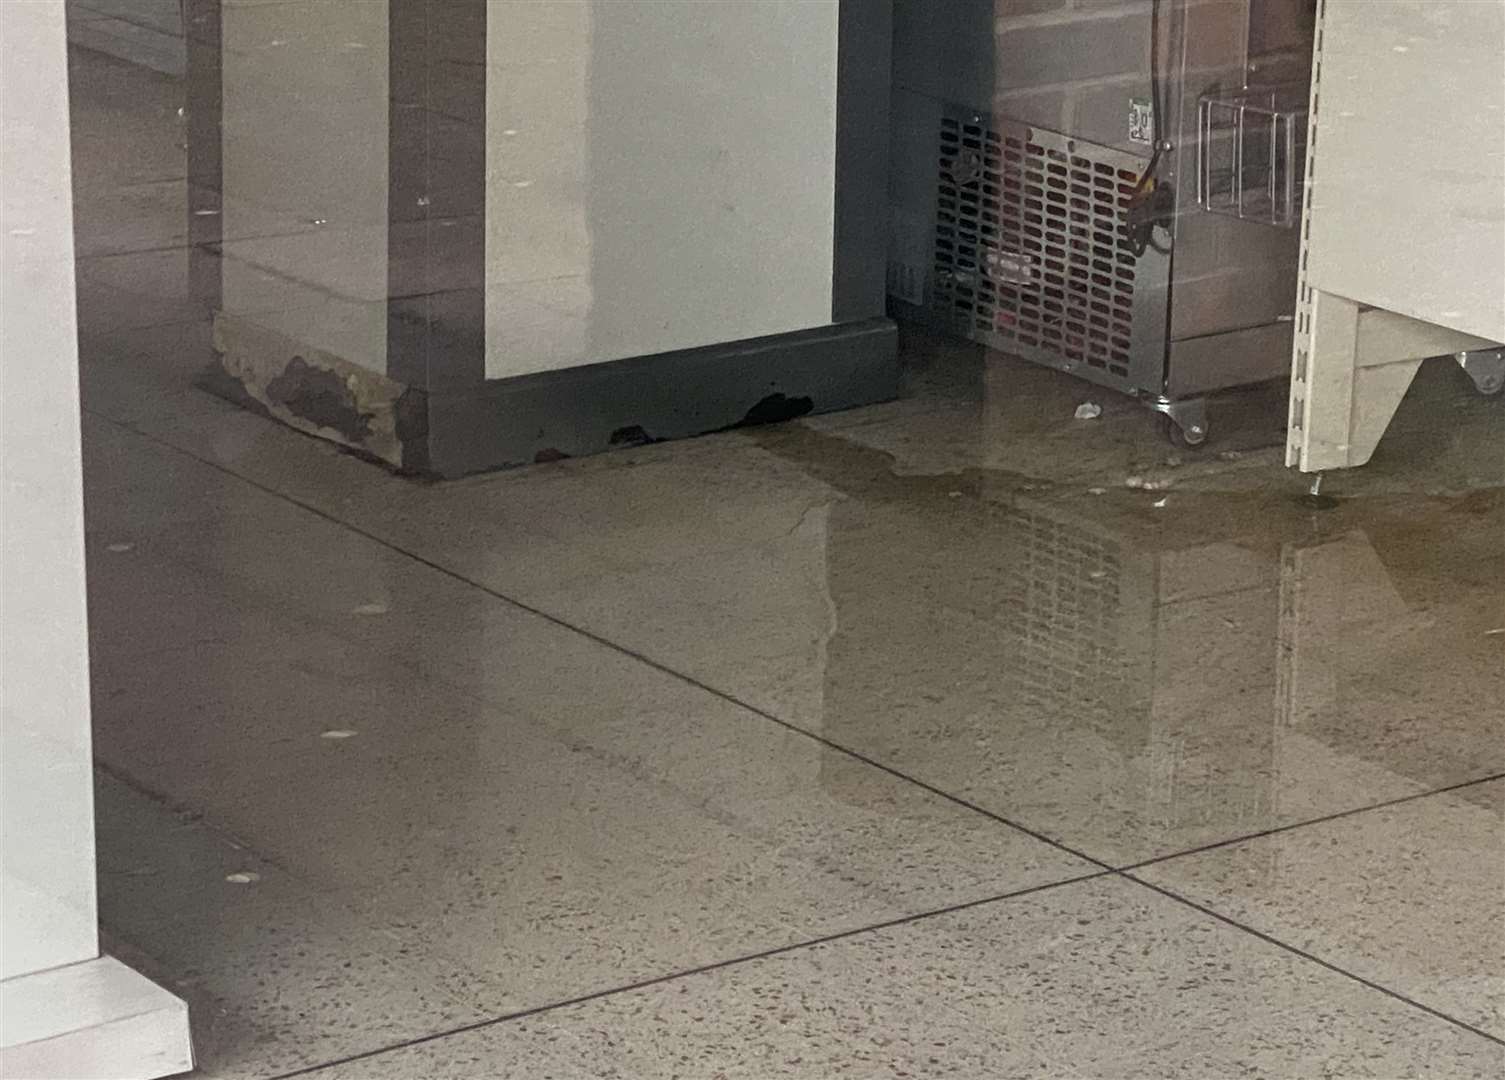 The water appears to be coming from a pillar inside the former Wilko